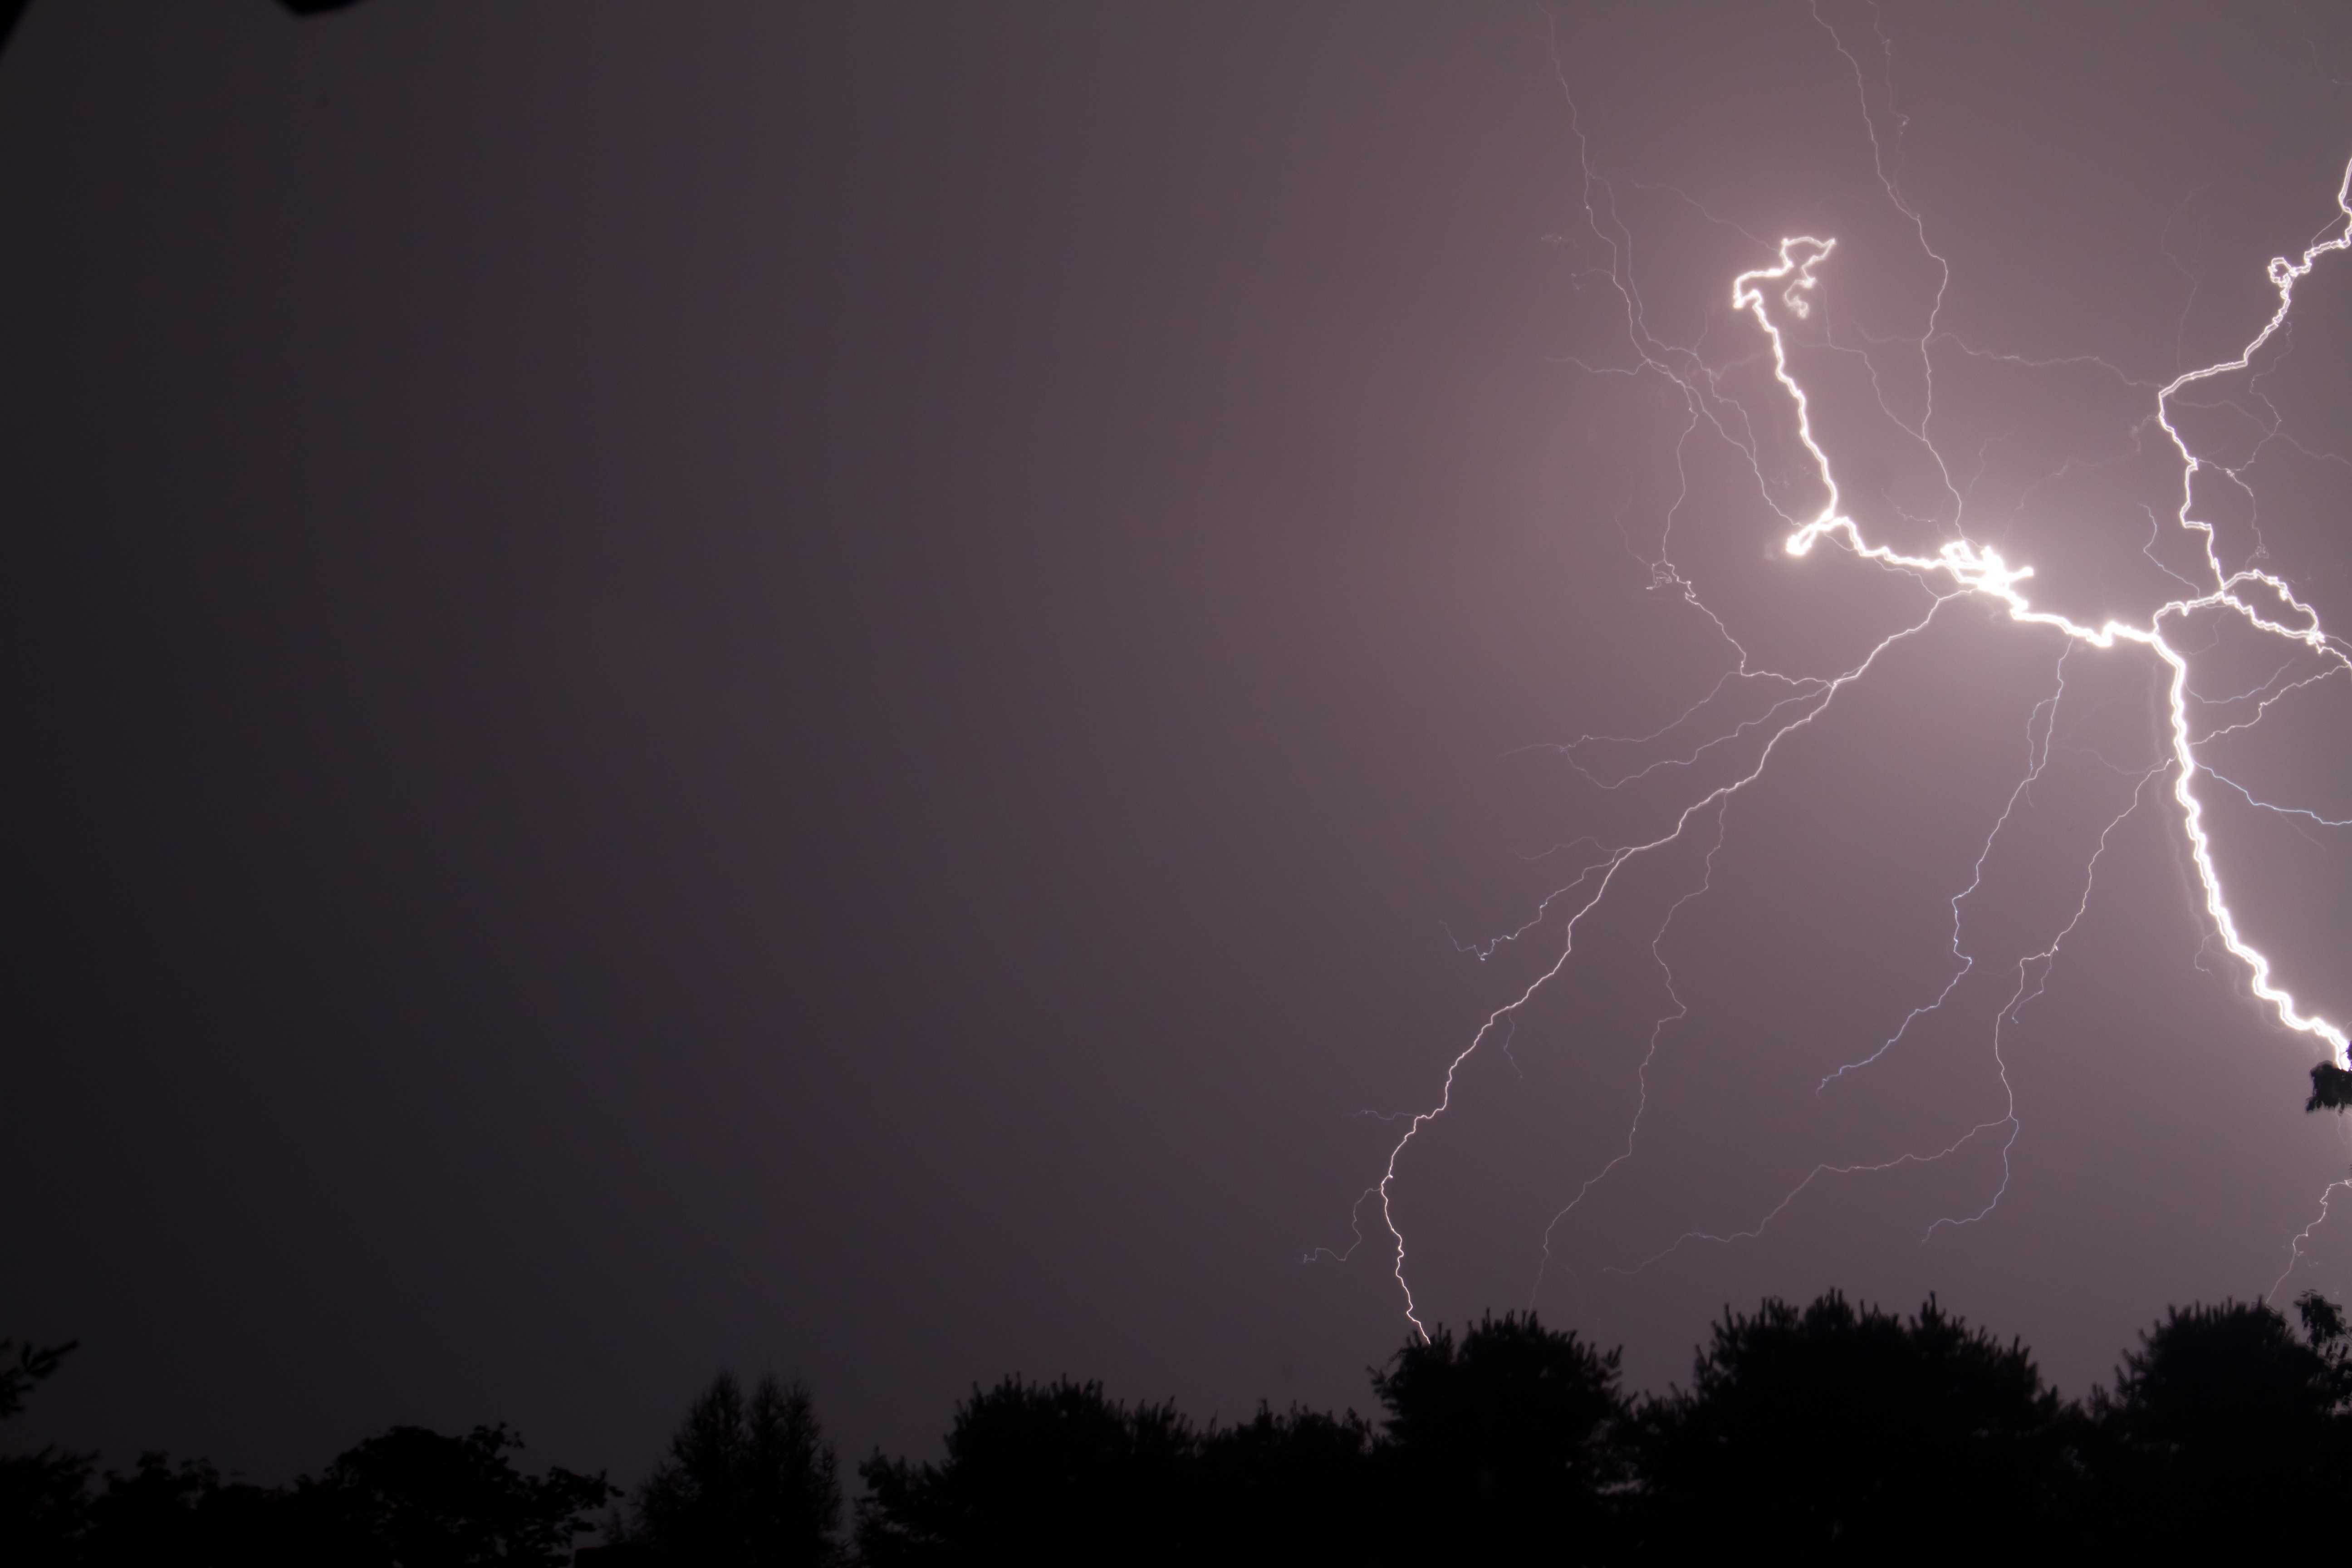 Lightning safety: 8 tips to protect yourself during a storm